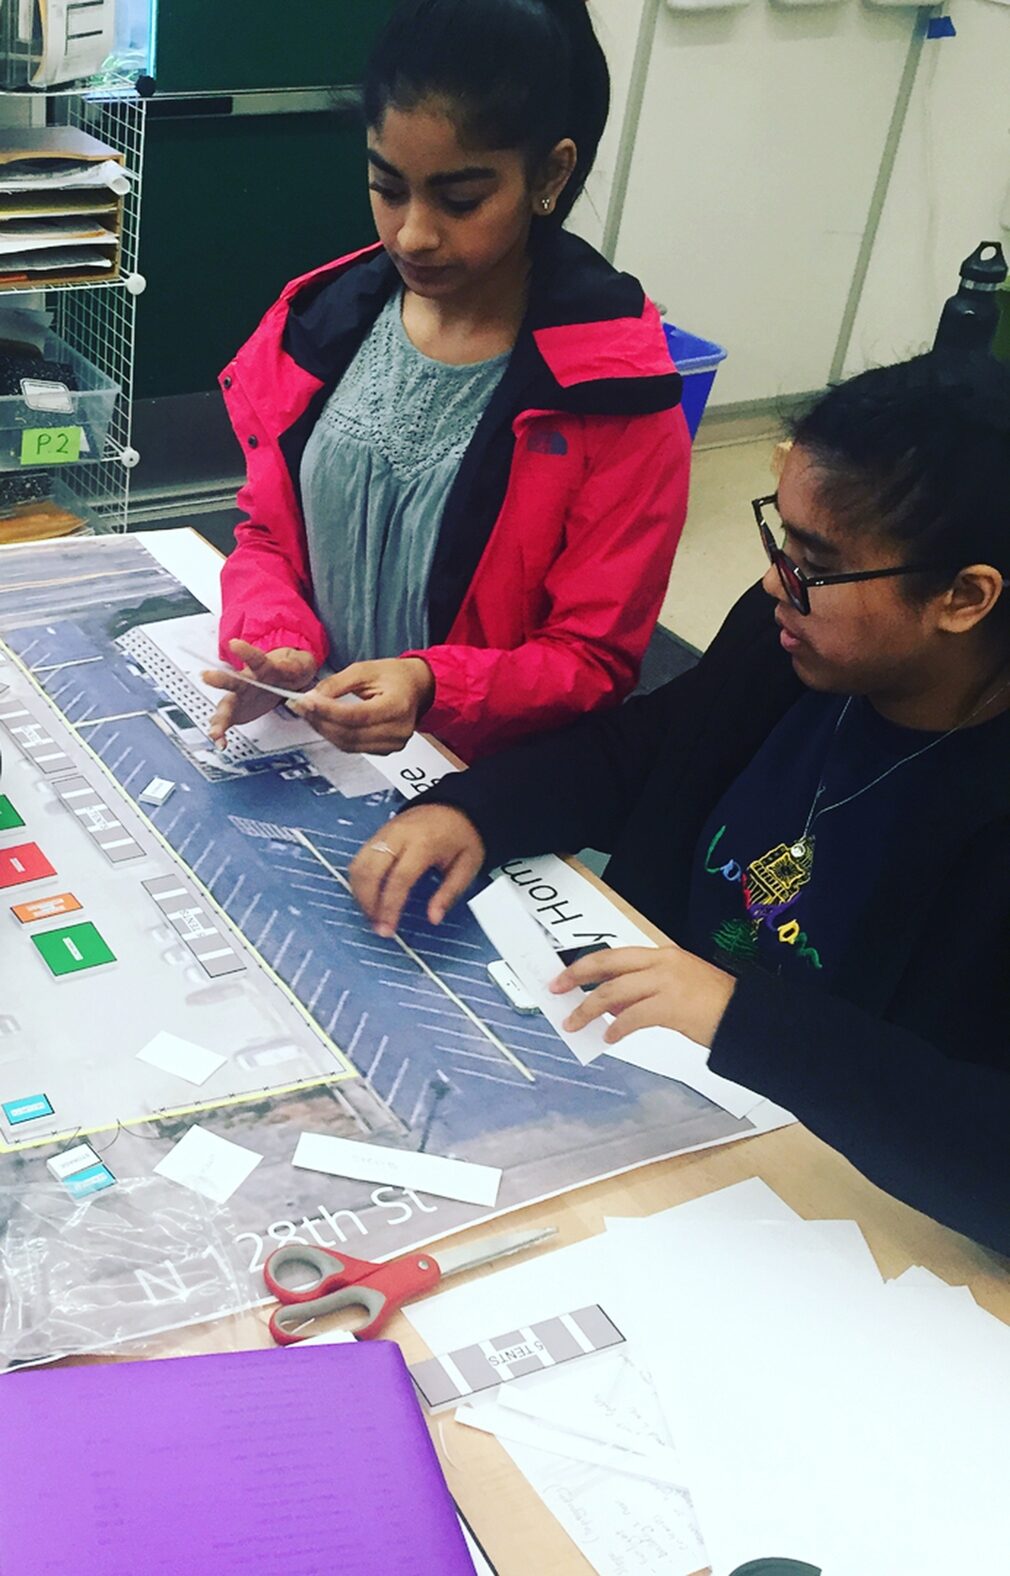 Students collaborate on developing a site layout for the Tiny Home Village.